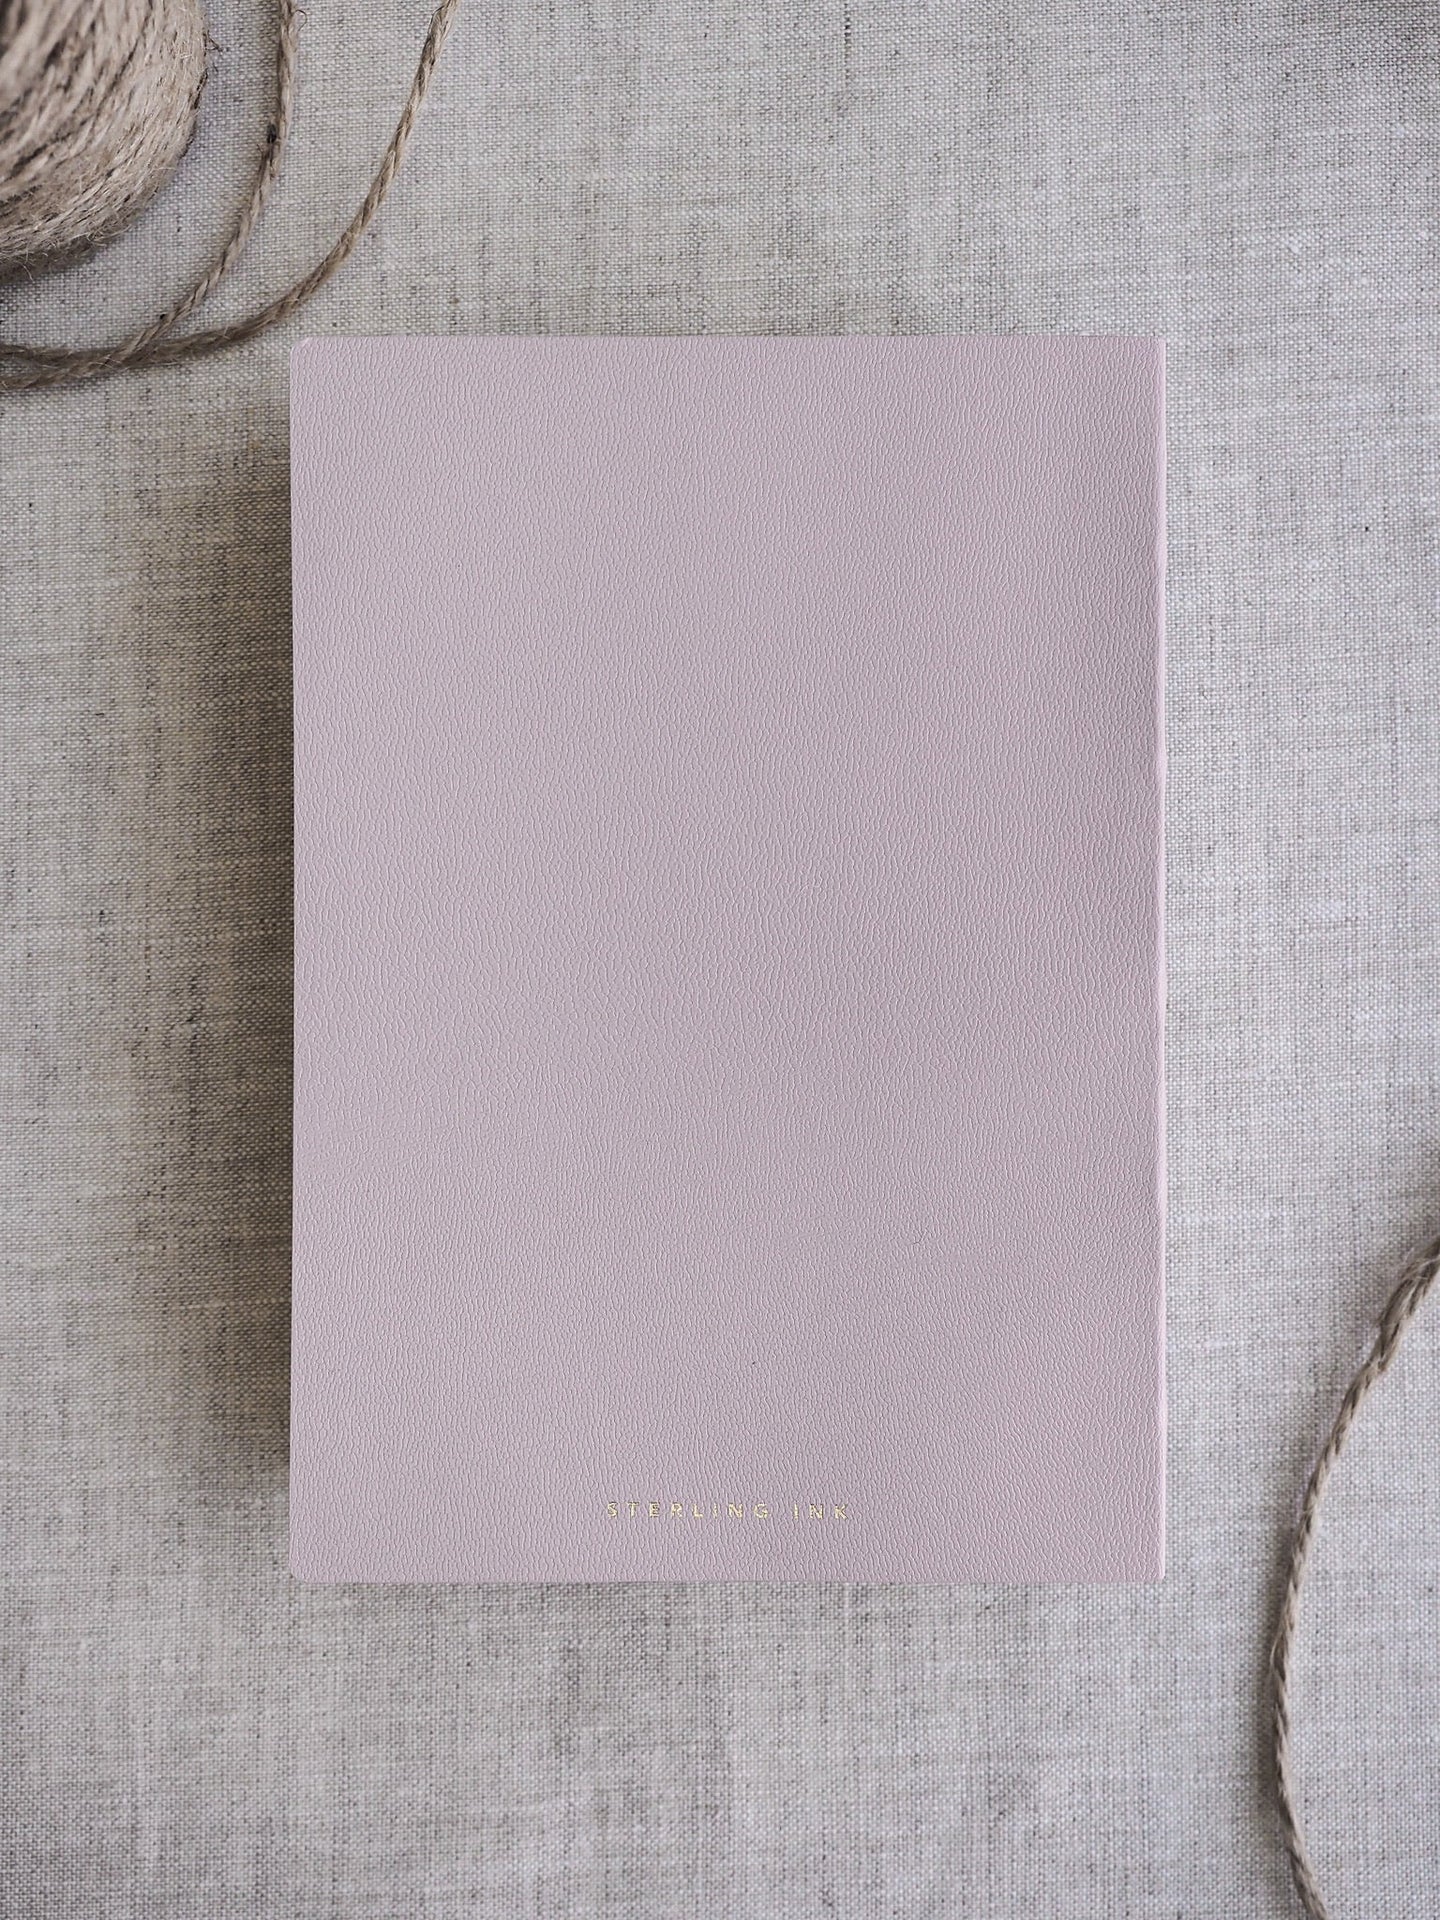 B6 260 Page Grid Notebooks - SOFT COVER (READY TO SHIP)